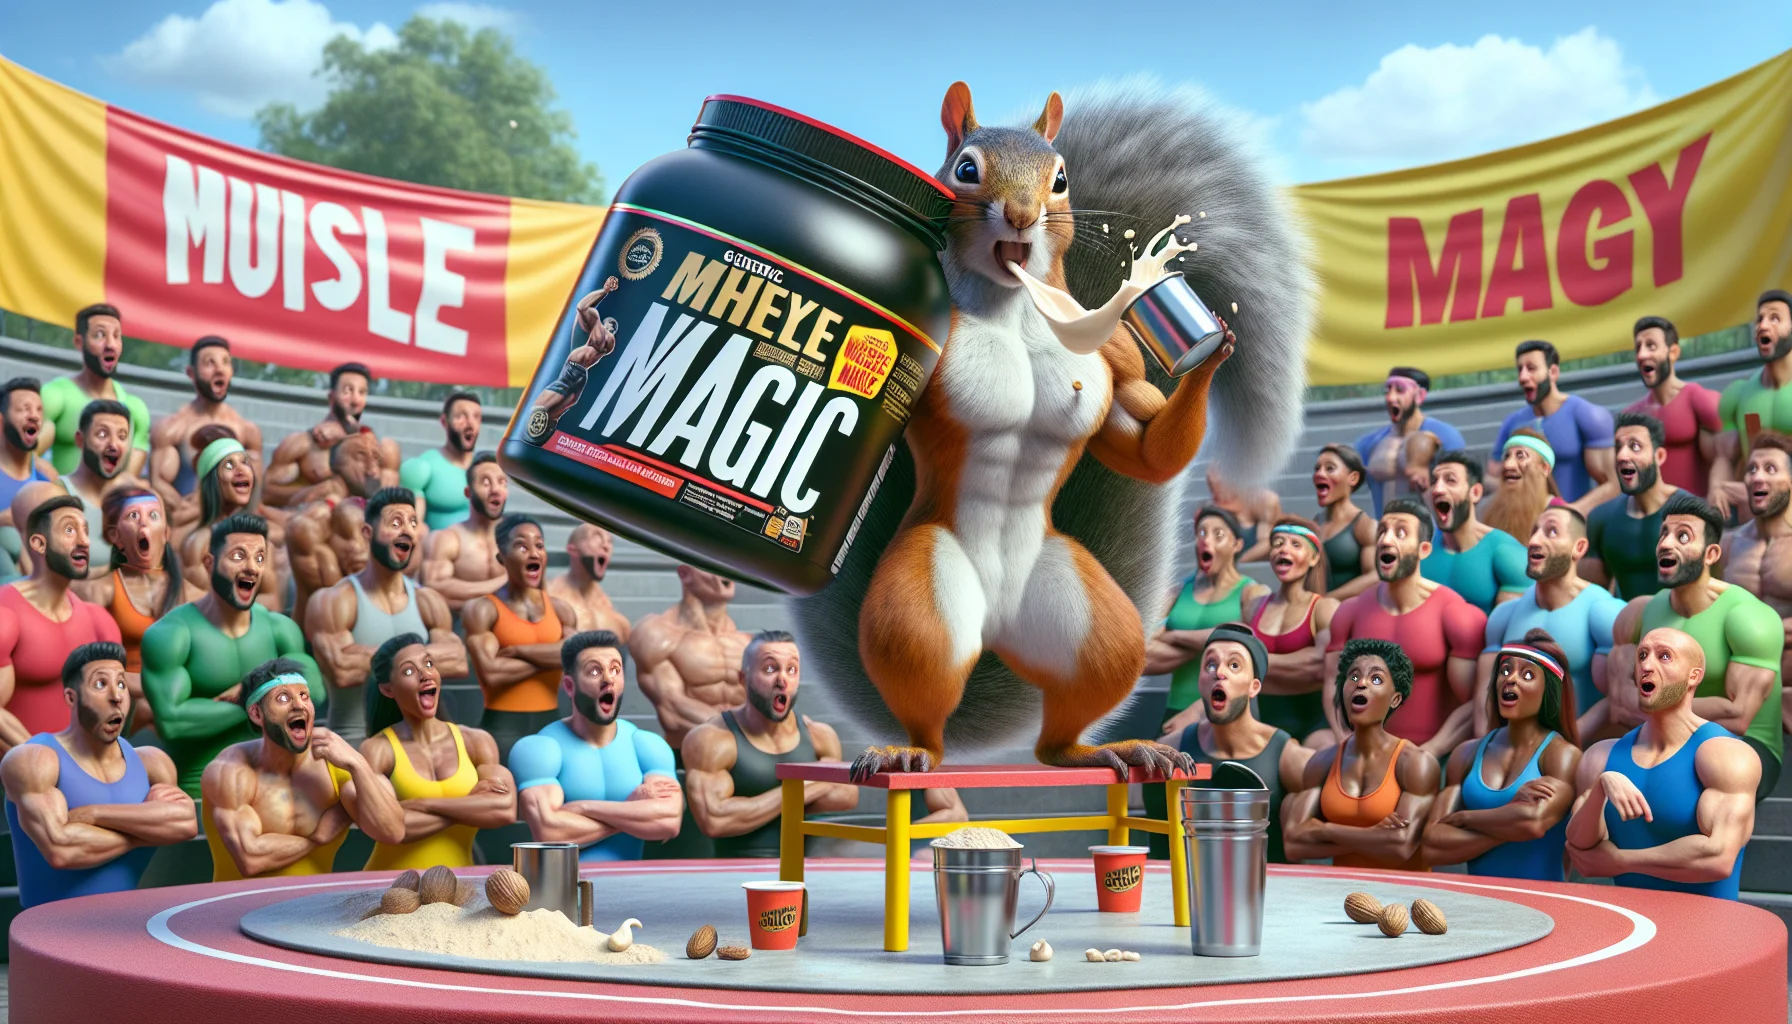 Create an image showcasing a generic whey protein tub with a funny label such as 'Muscle Magic' in an engaging scenario. The scene depicts an athletic squirrel with bulging biceps, mimicking a body builder pose, chugging from a tiny mug overflowing with this protein powder. In the background, a diverse group of human spectators reacting variously - some with surprised expressions, some snickering, and a few others taking notes diligently. The environment is like a vibrant sports carnival, laden with banners promoting healthy lifestyle, and the use of supplements for sports. Use vibrant colors to make it look lively and appealing.